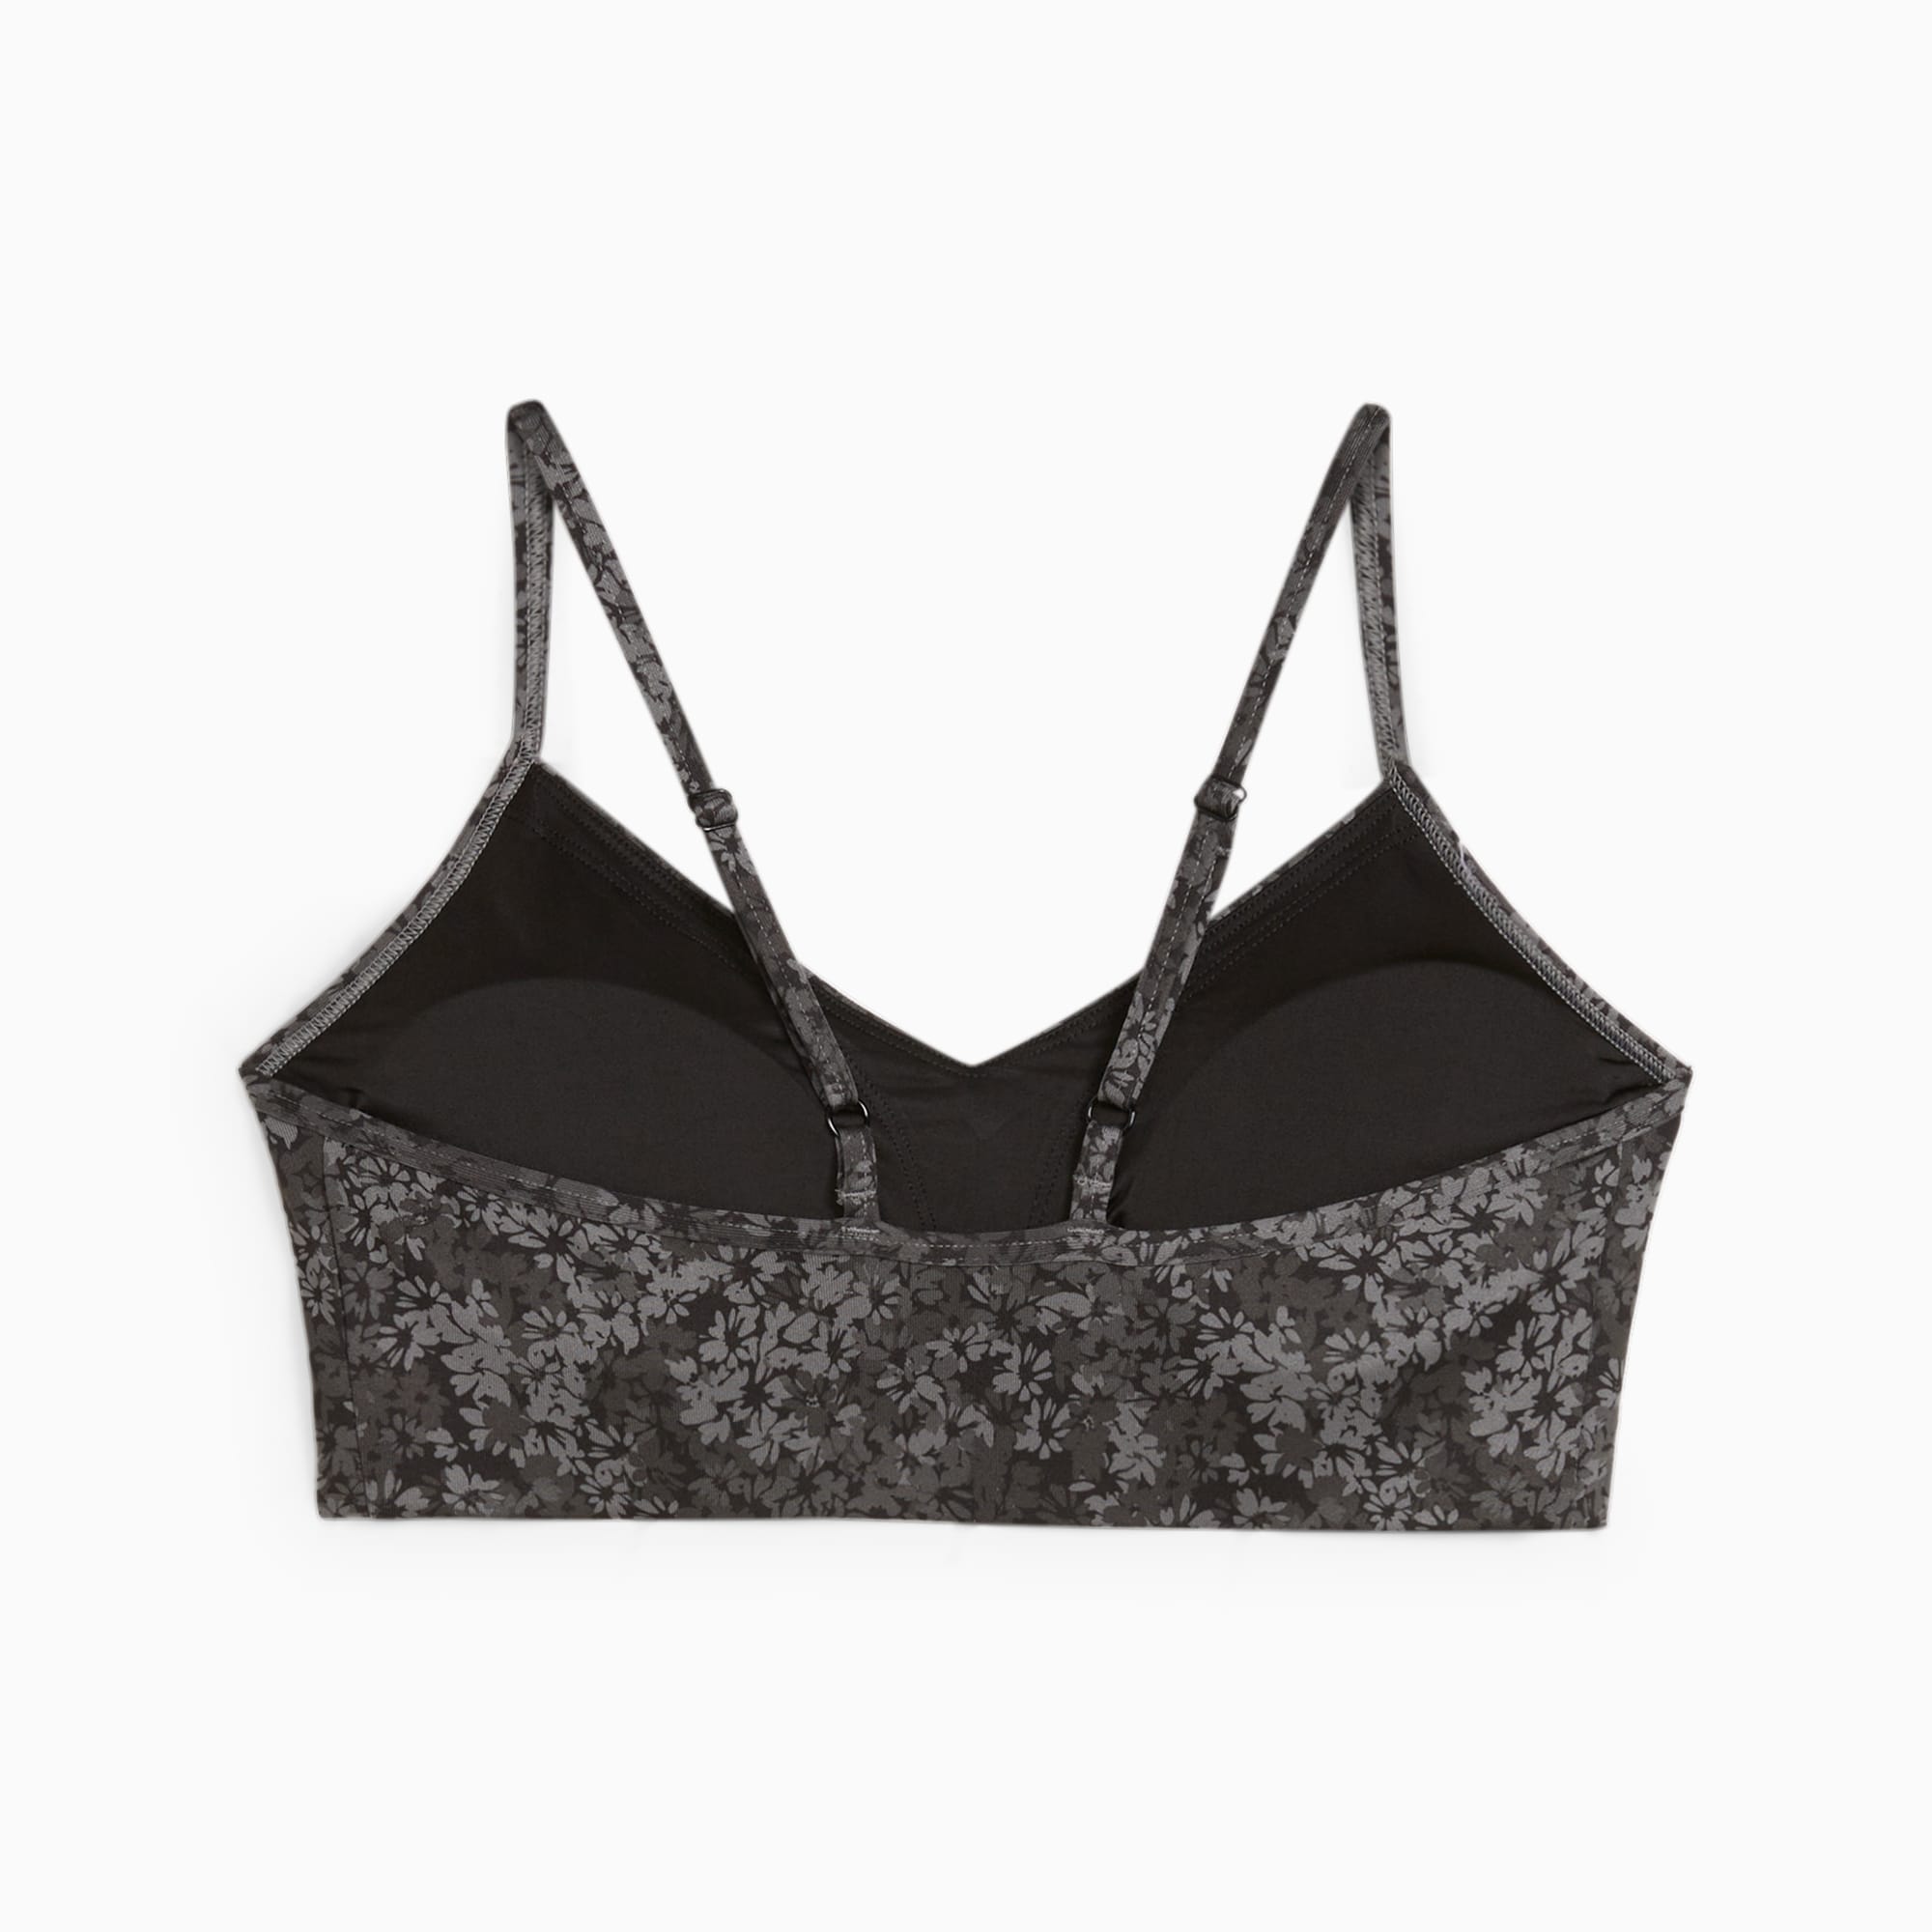 QUYUON Clearance Yoga Sports Bras Women's Fashionable Lace